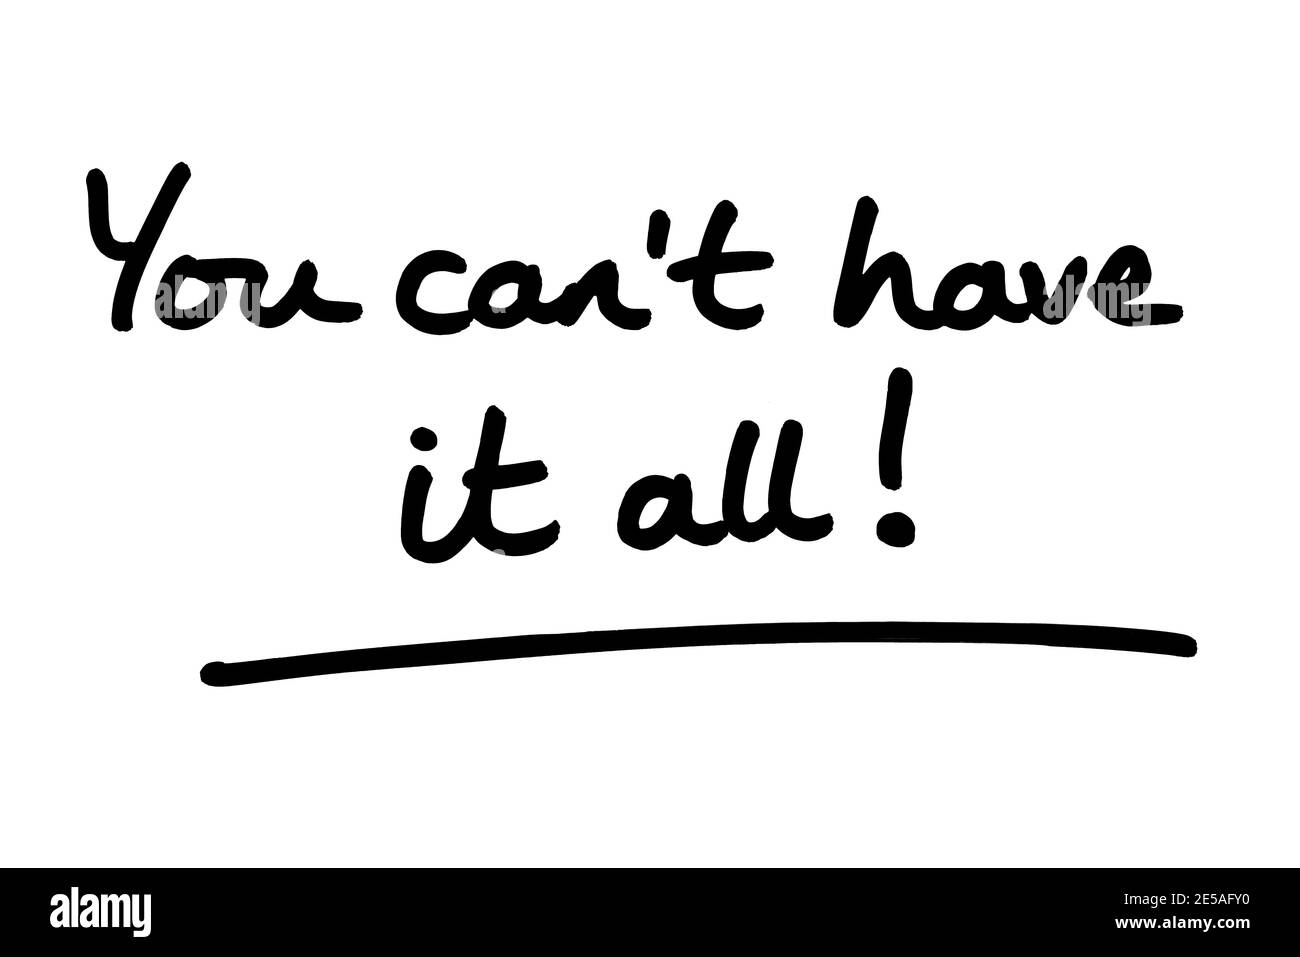 You cant have it all! handwritten on a white background. Stock Photo